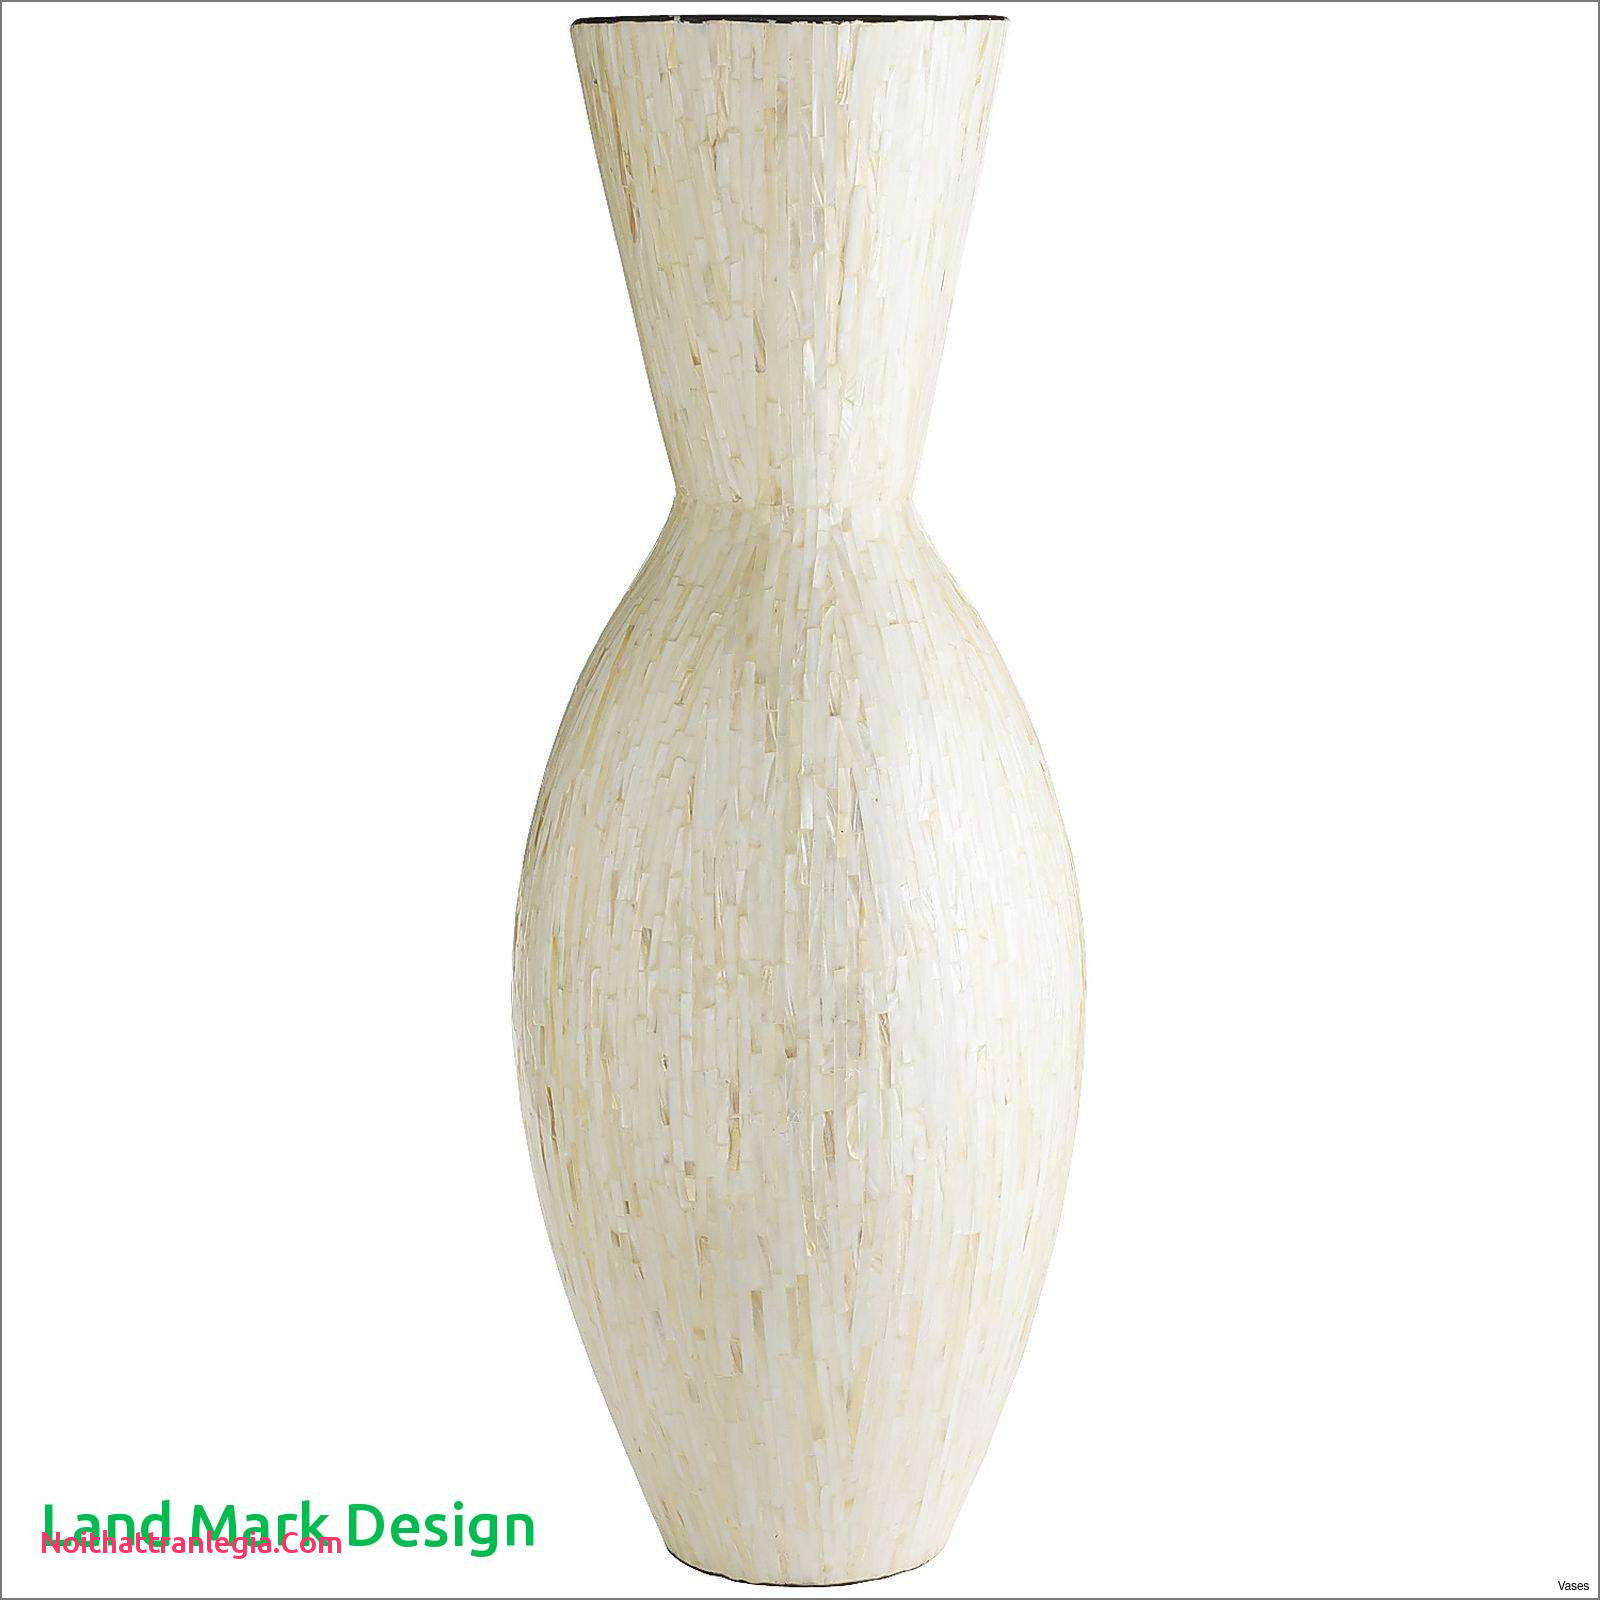 24 Nice Large Floor Vase 36 Inch 2024 free download large floor vase 36 inch of 20 large floor vase nz noithattranlegia vases design throughout full size of living room floor vases tall luxury d dkbrw 5749 1h vases tall large